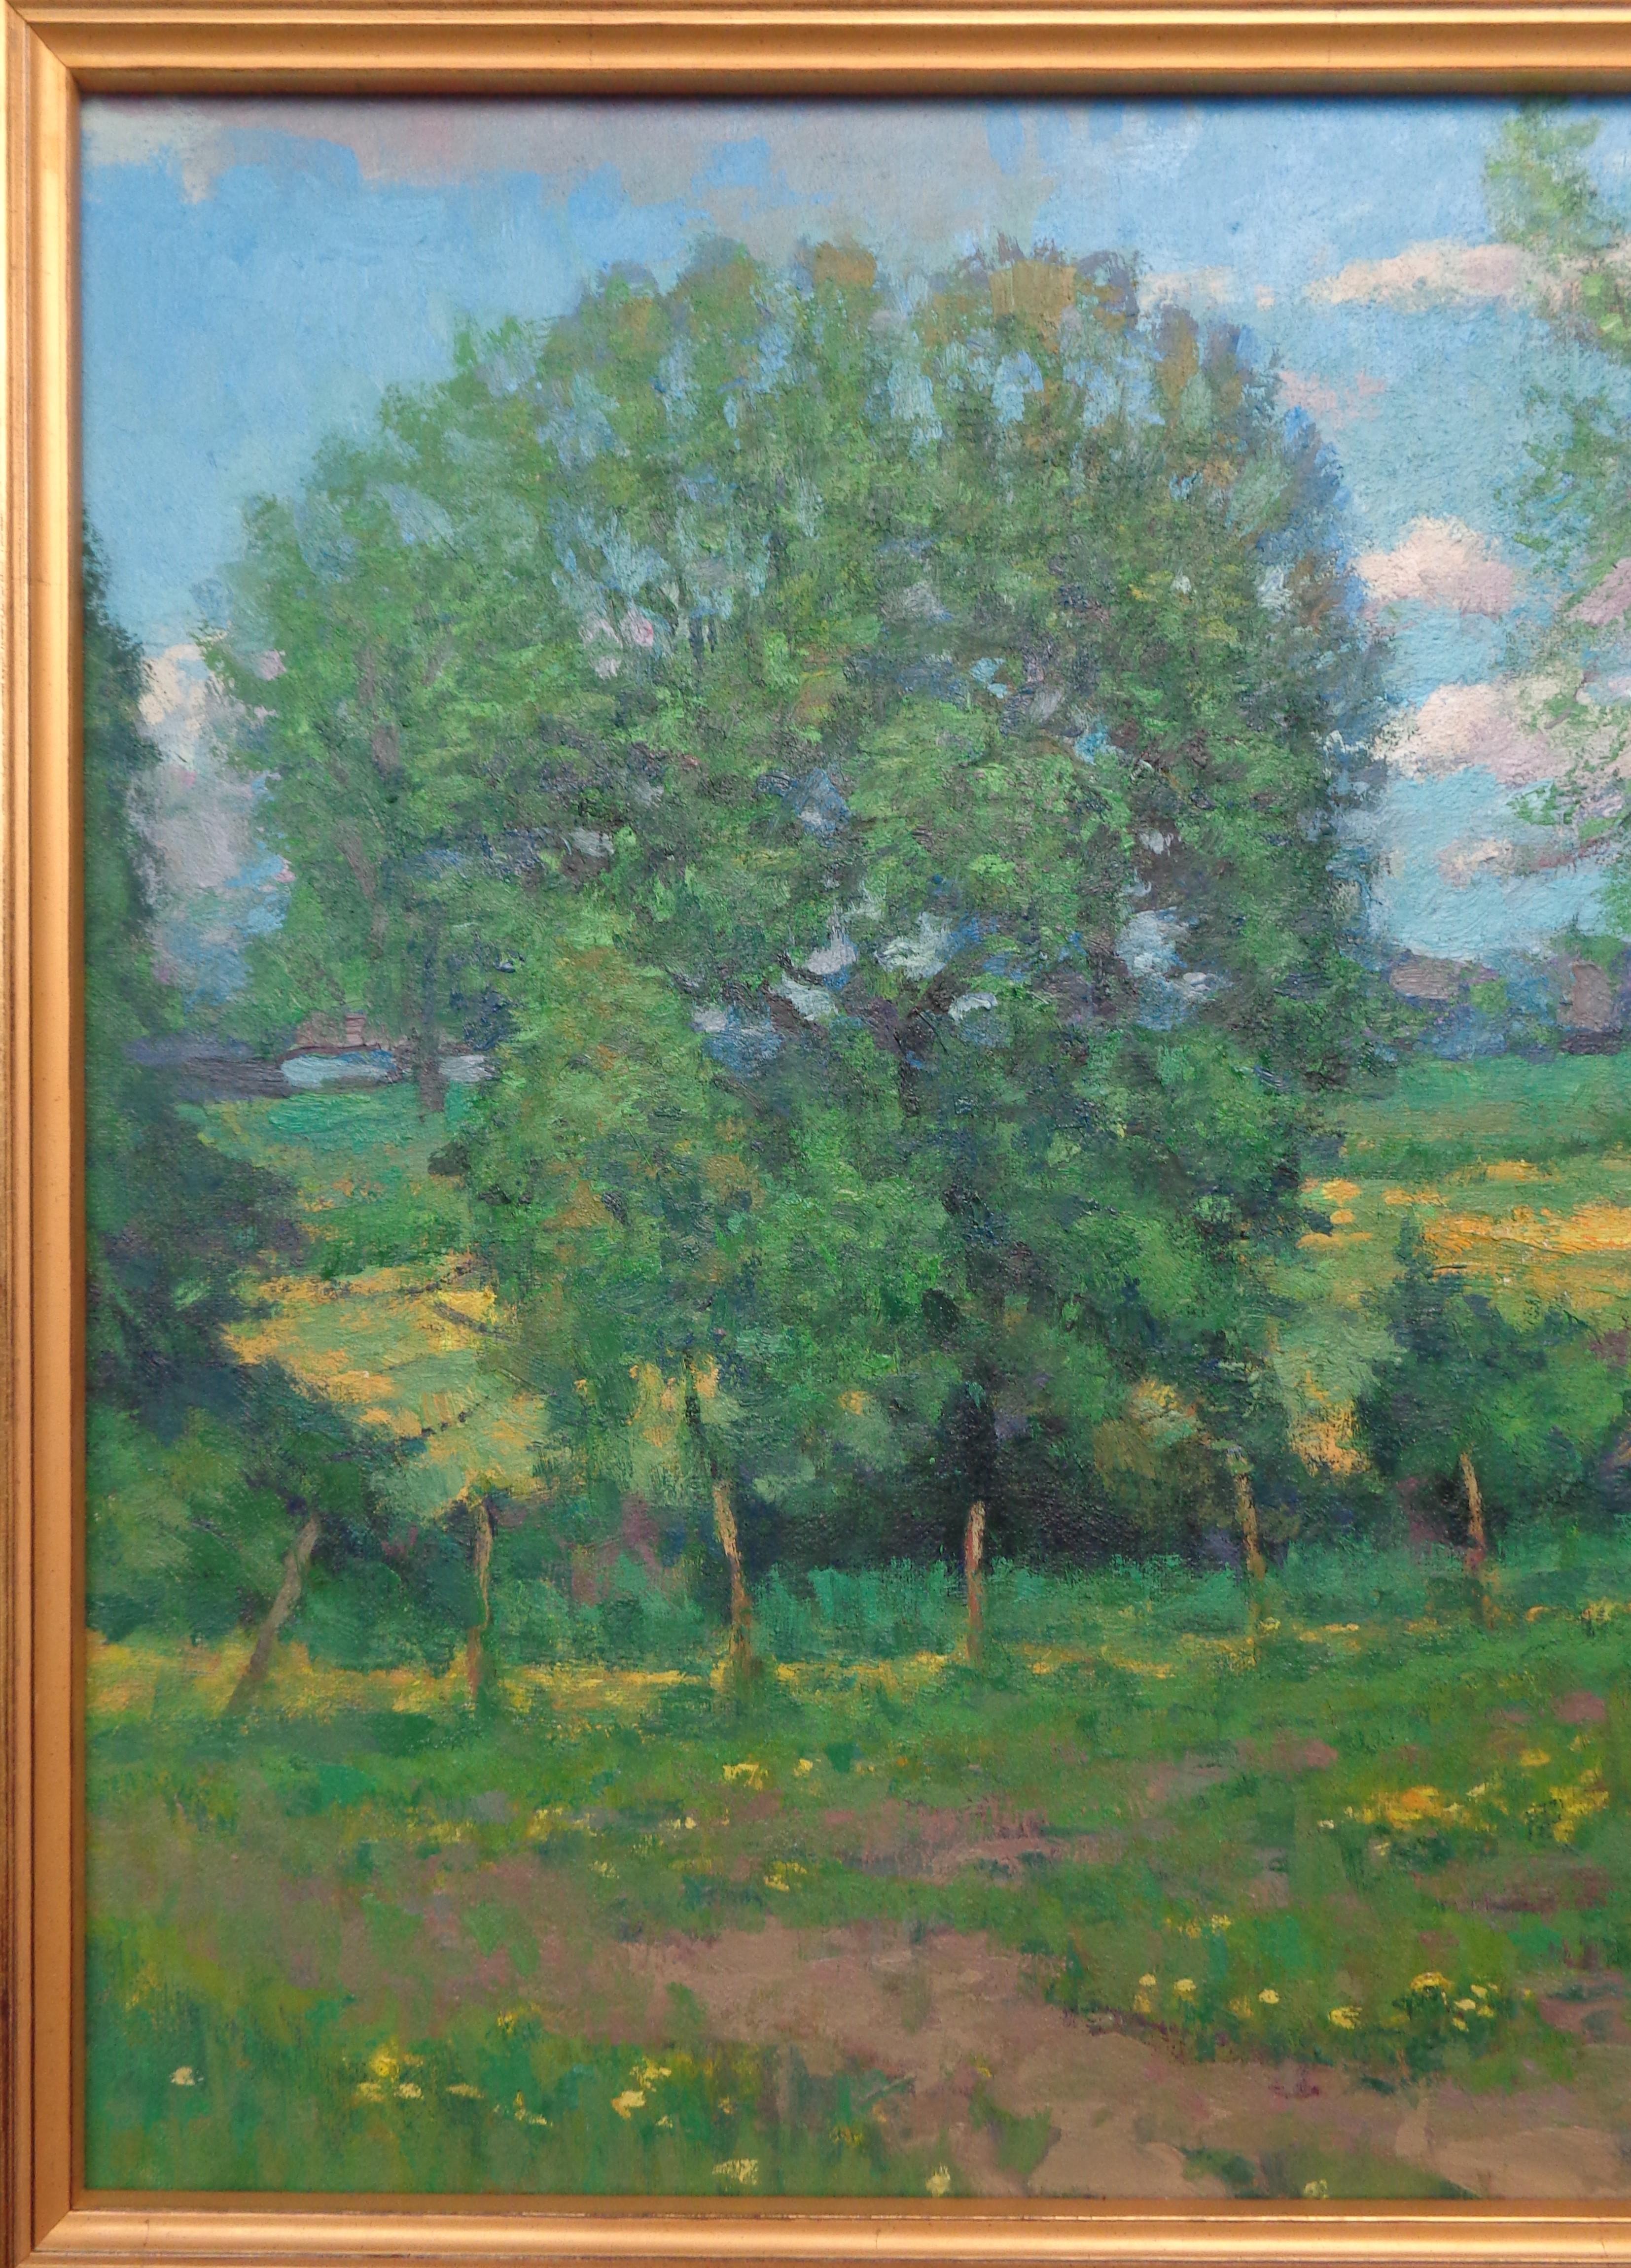  Impressionistic Farm Landscape Oil Painting Michael Budden Glorious Spring For Sale 1